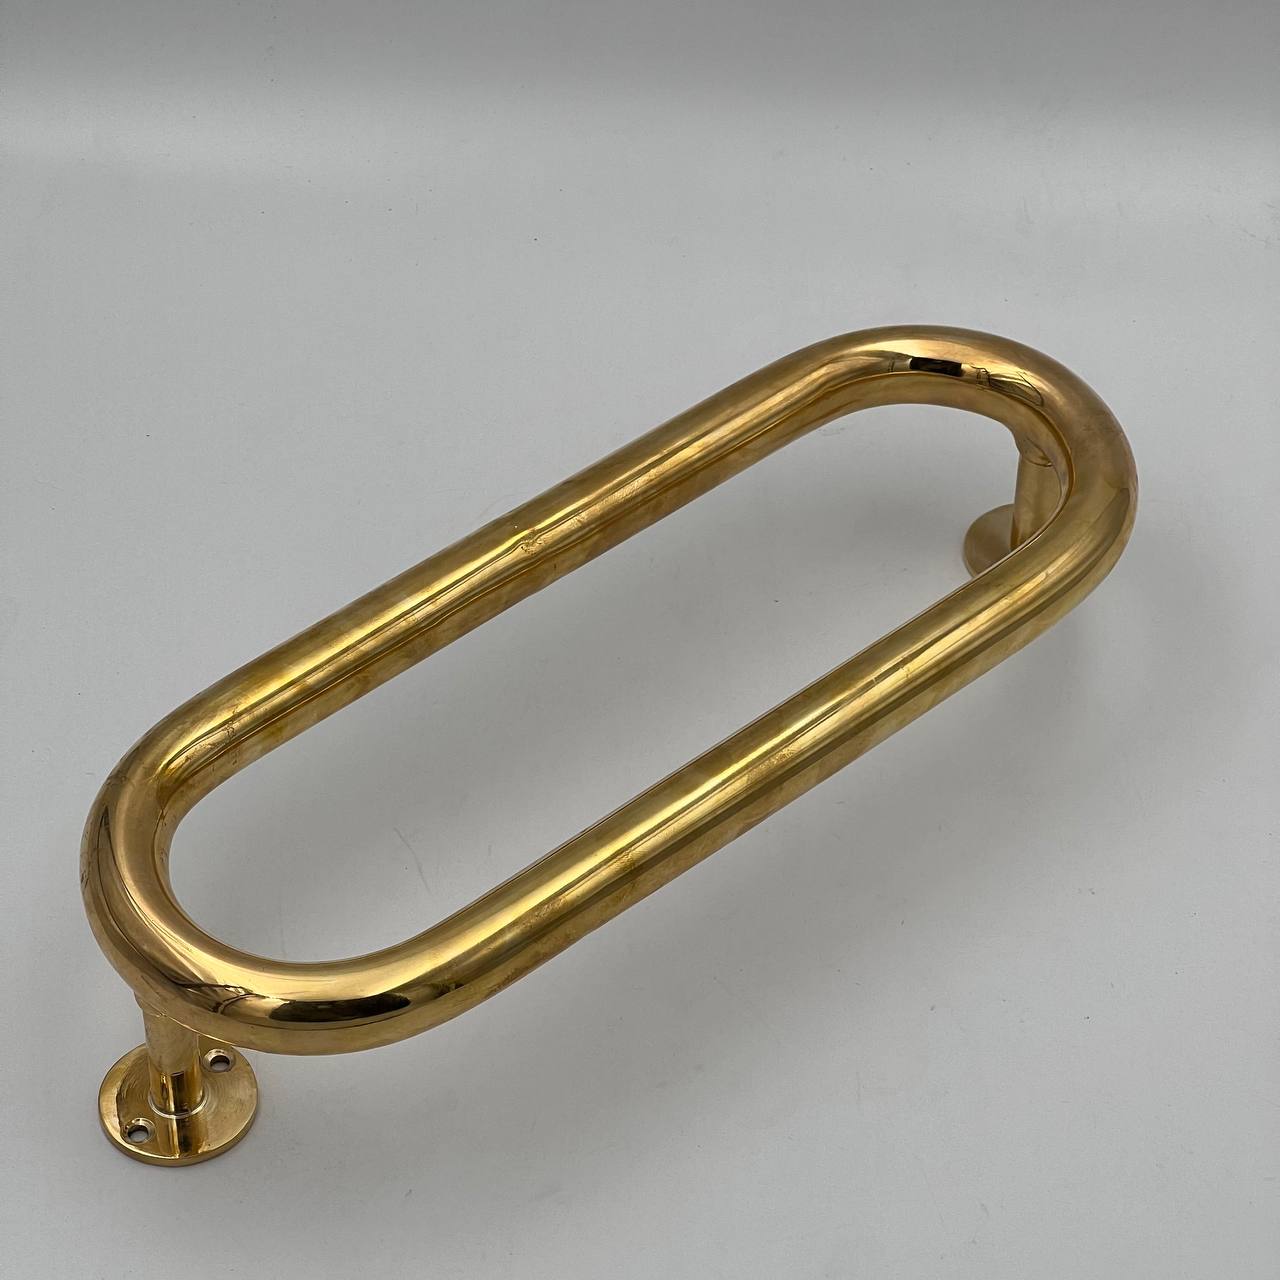 Unlacquered Brass Entry Pull Handle Handle - Large Door Pulls